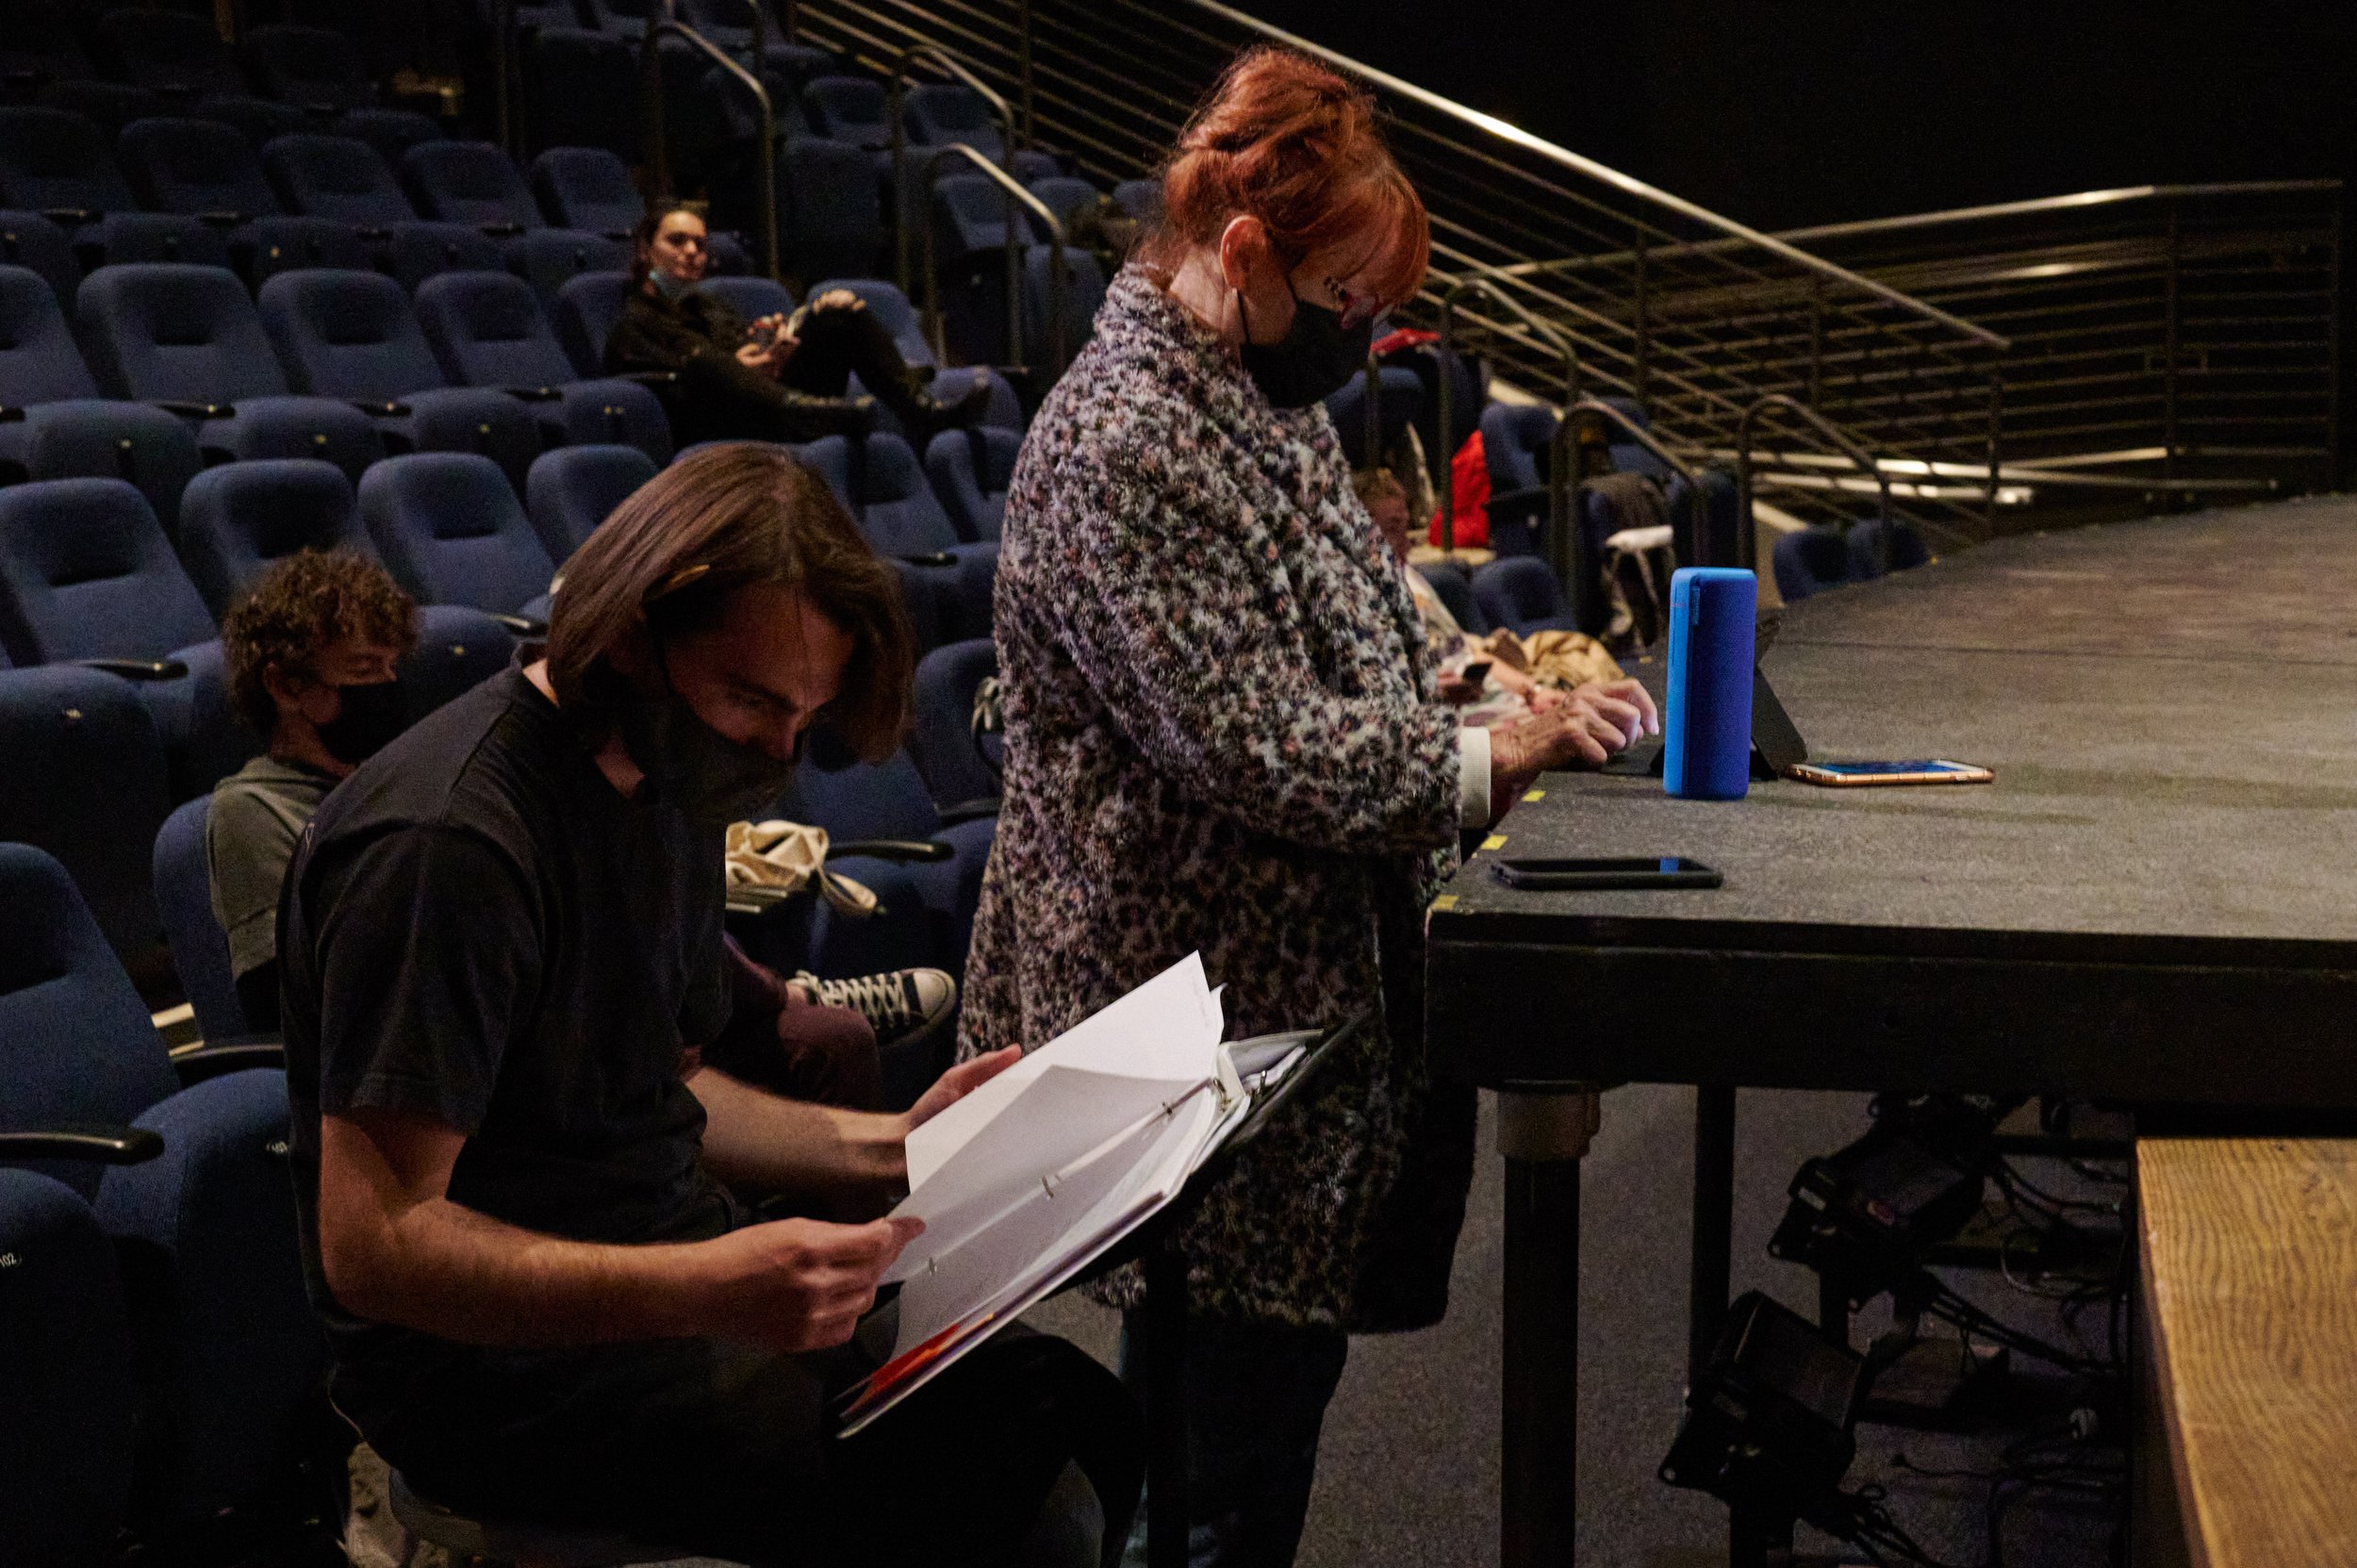  Stage Manager/Assistant Director Matthew Steward and Director Terrin Adair during rehearsal of the Santa Monica College Theatre Arts production of "Treasure Island" at the SMC Main Stage on Wednesday, April 27, 2022, in Santa Monica, Calif. (Nichola